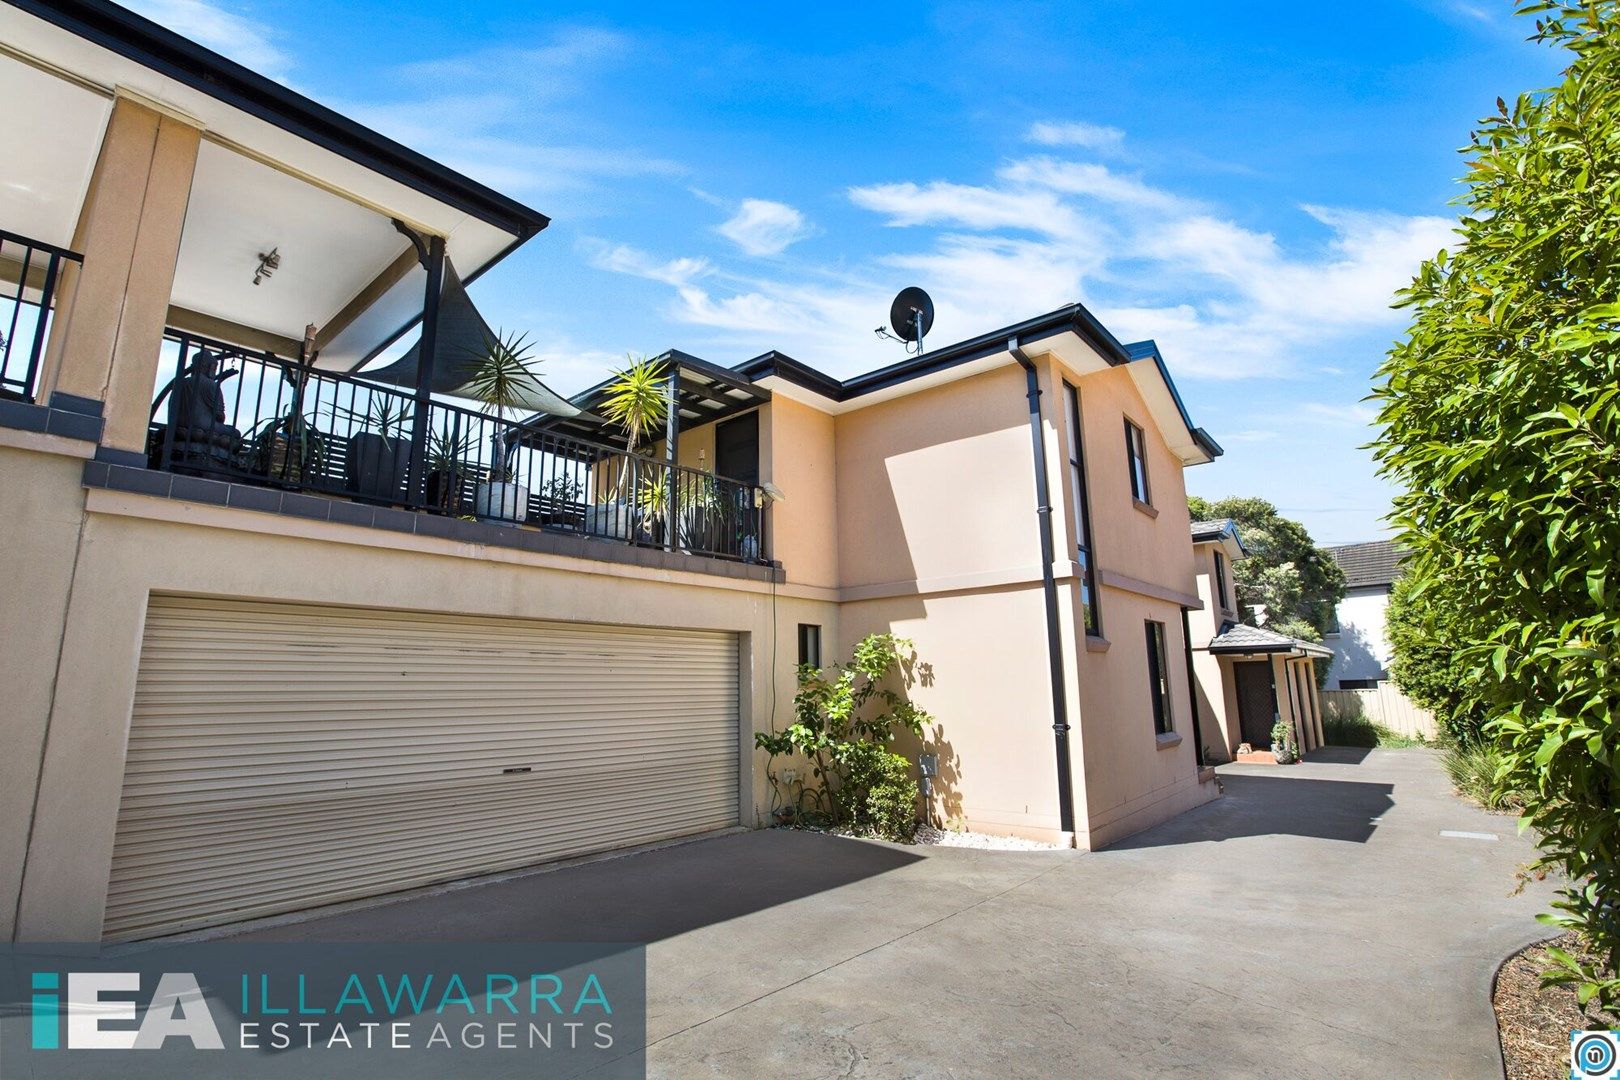 2 bedrooms Townhouse in 2/9 Allan Street WOLLONGONG NSW, 2500